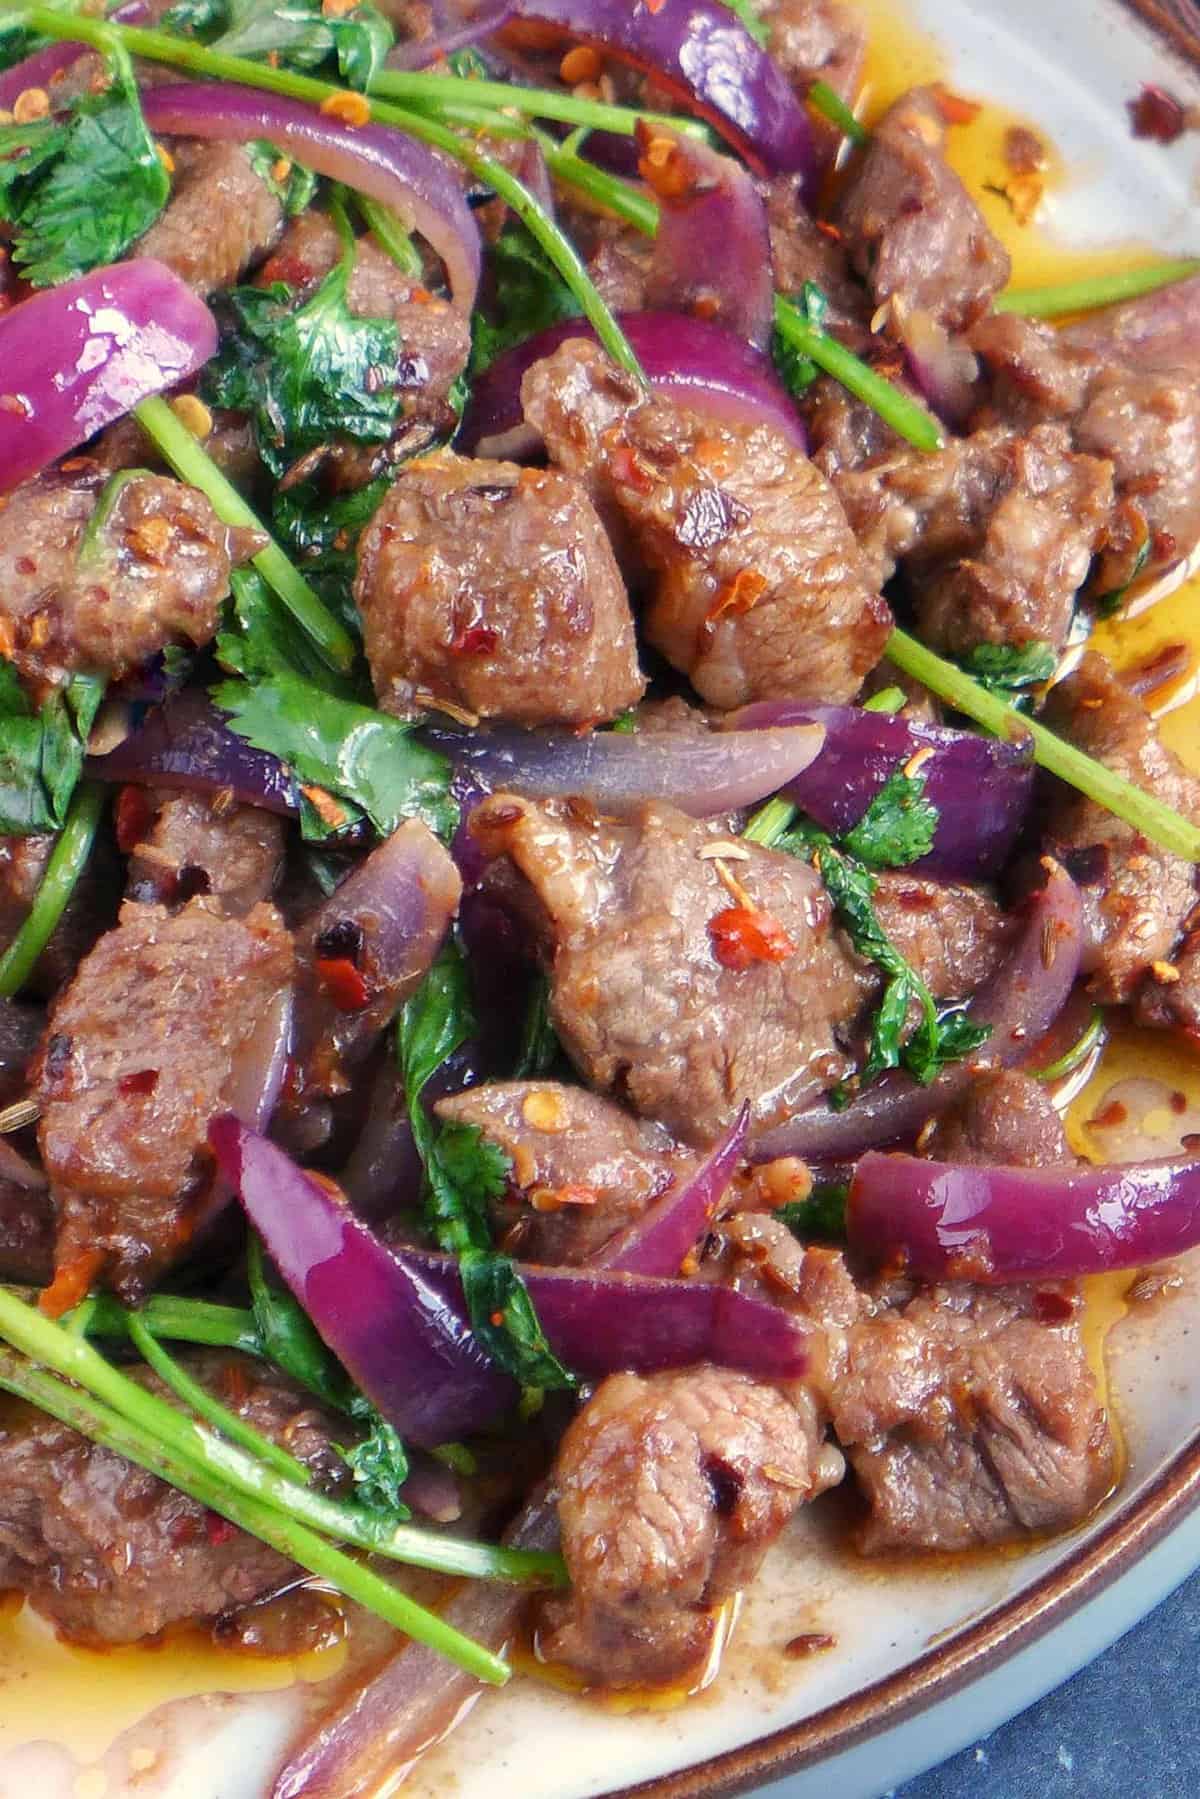 Stir-fried lamb coated with spices